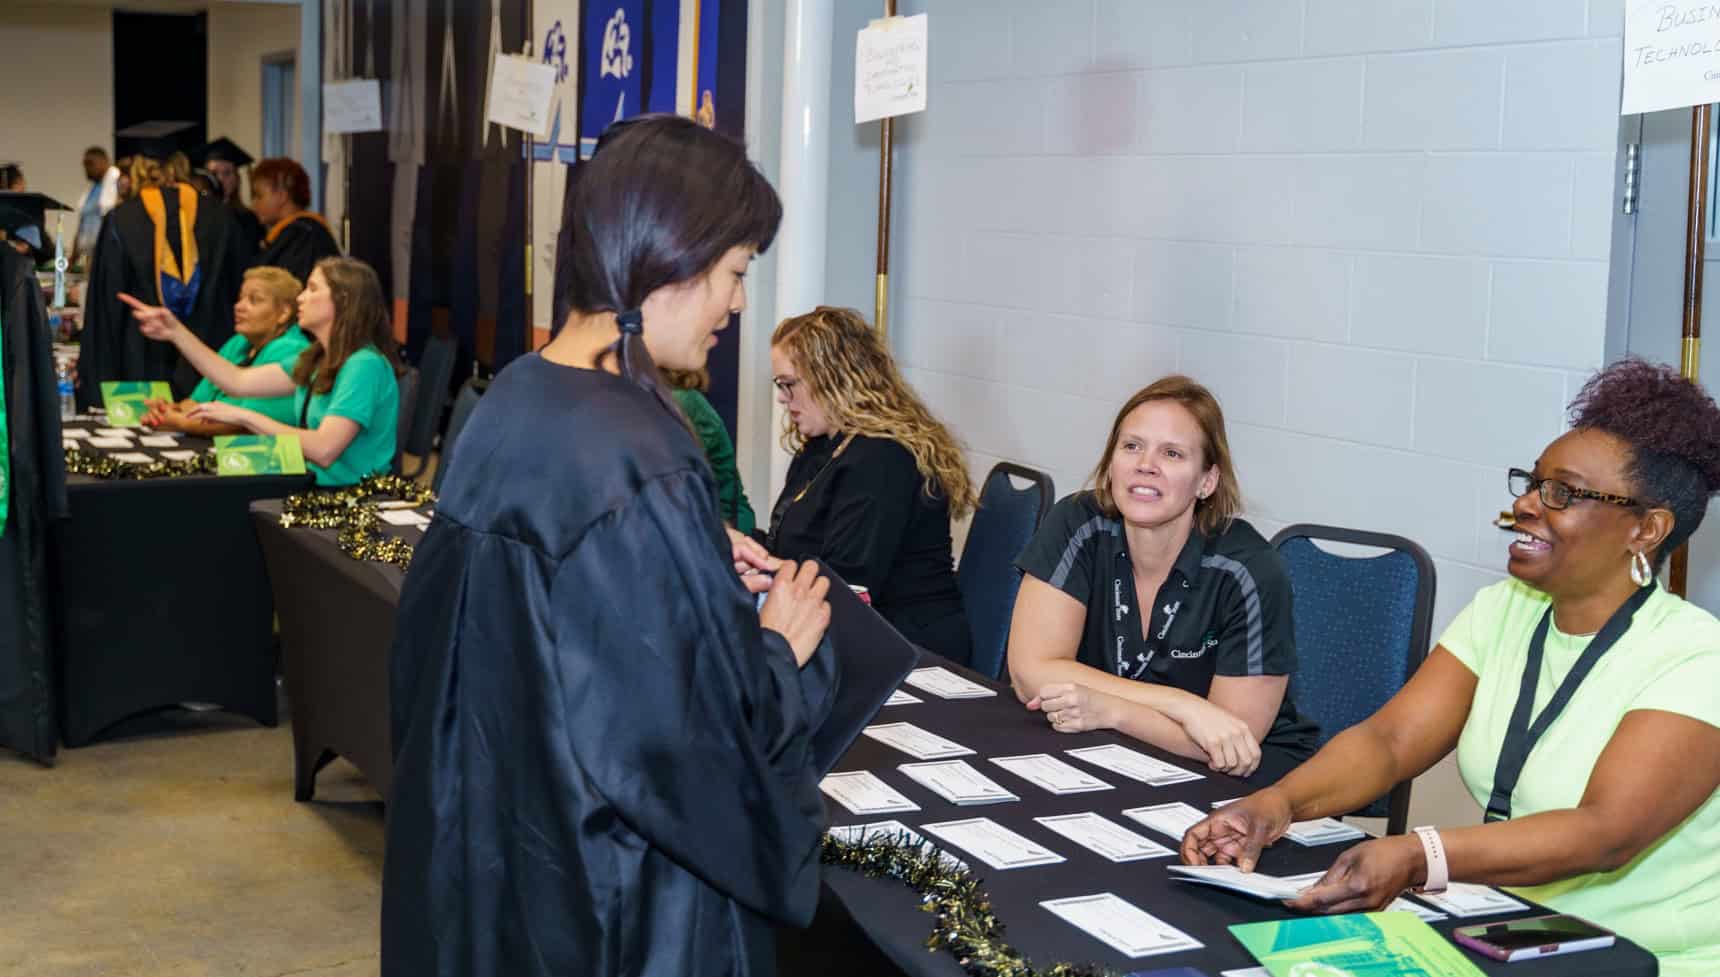 College staff members helped graduates check-in and prepare for the ceremony